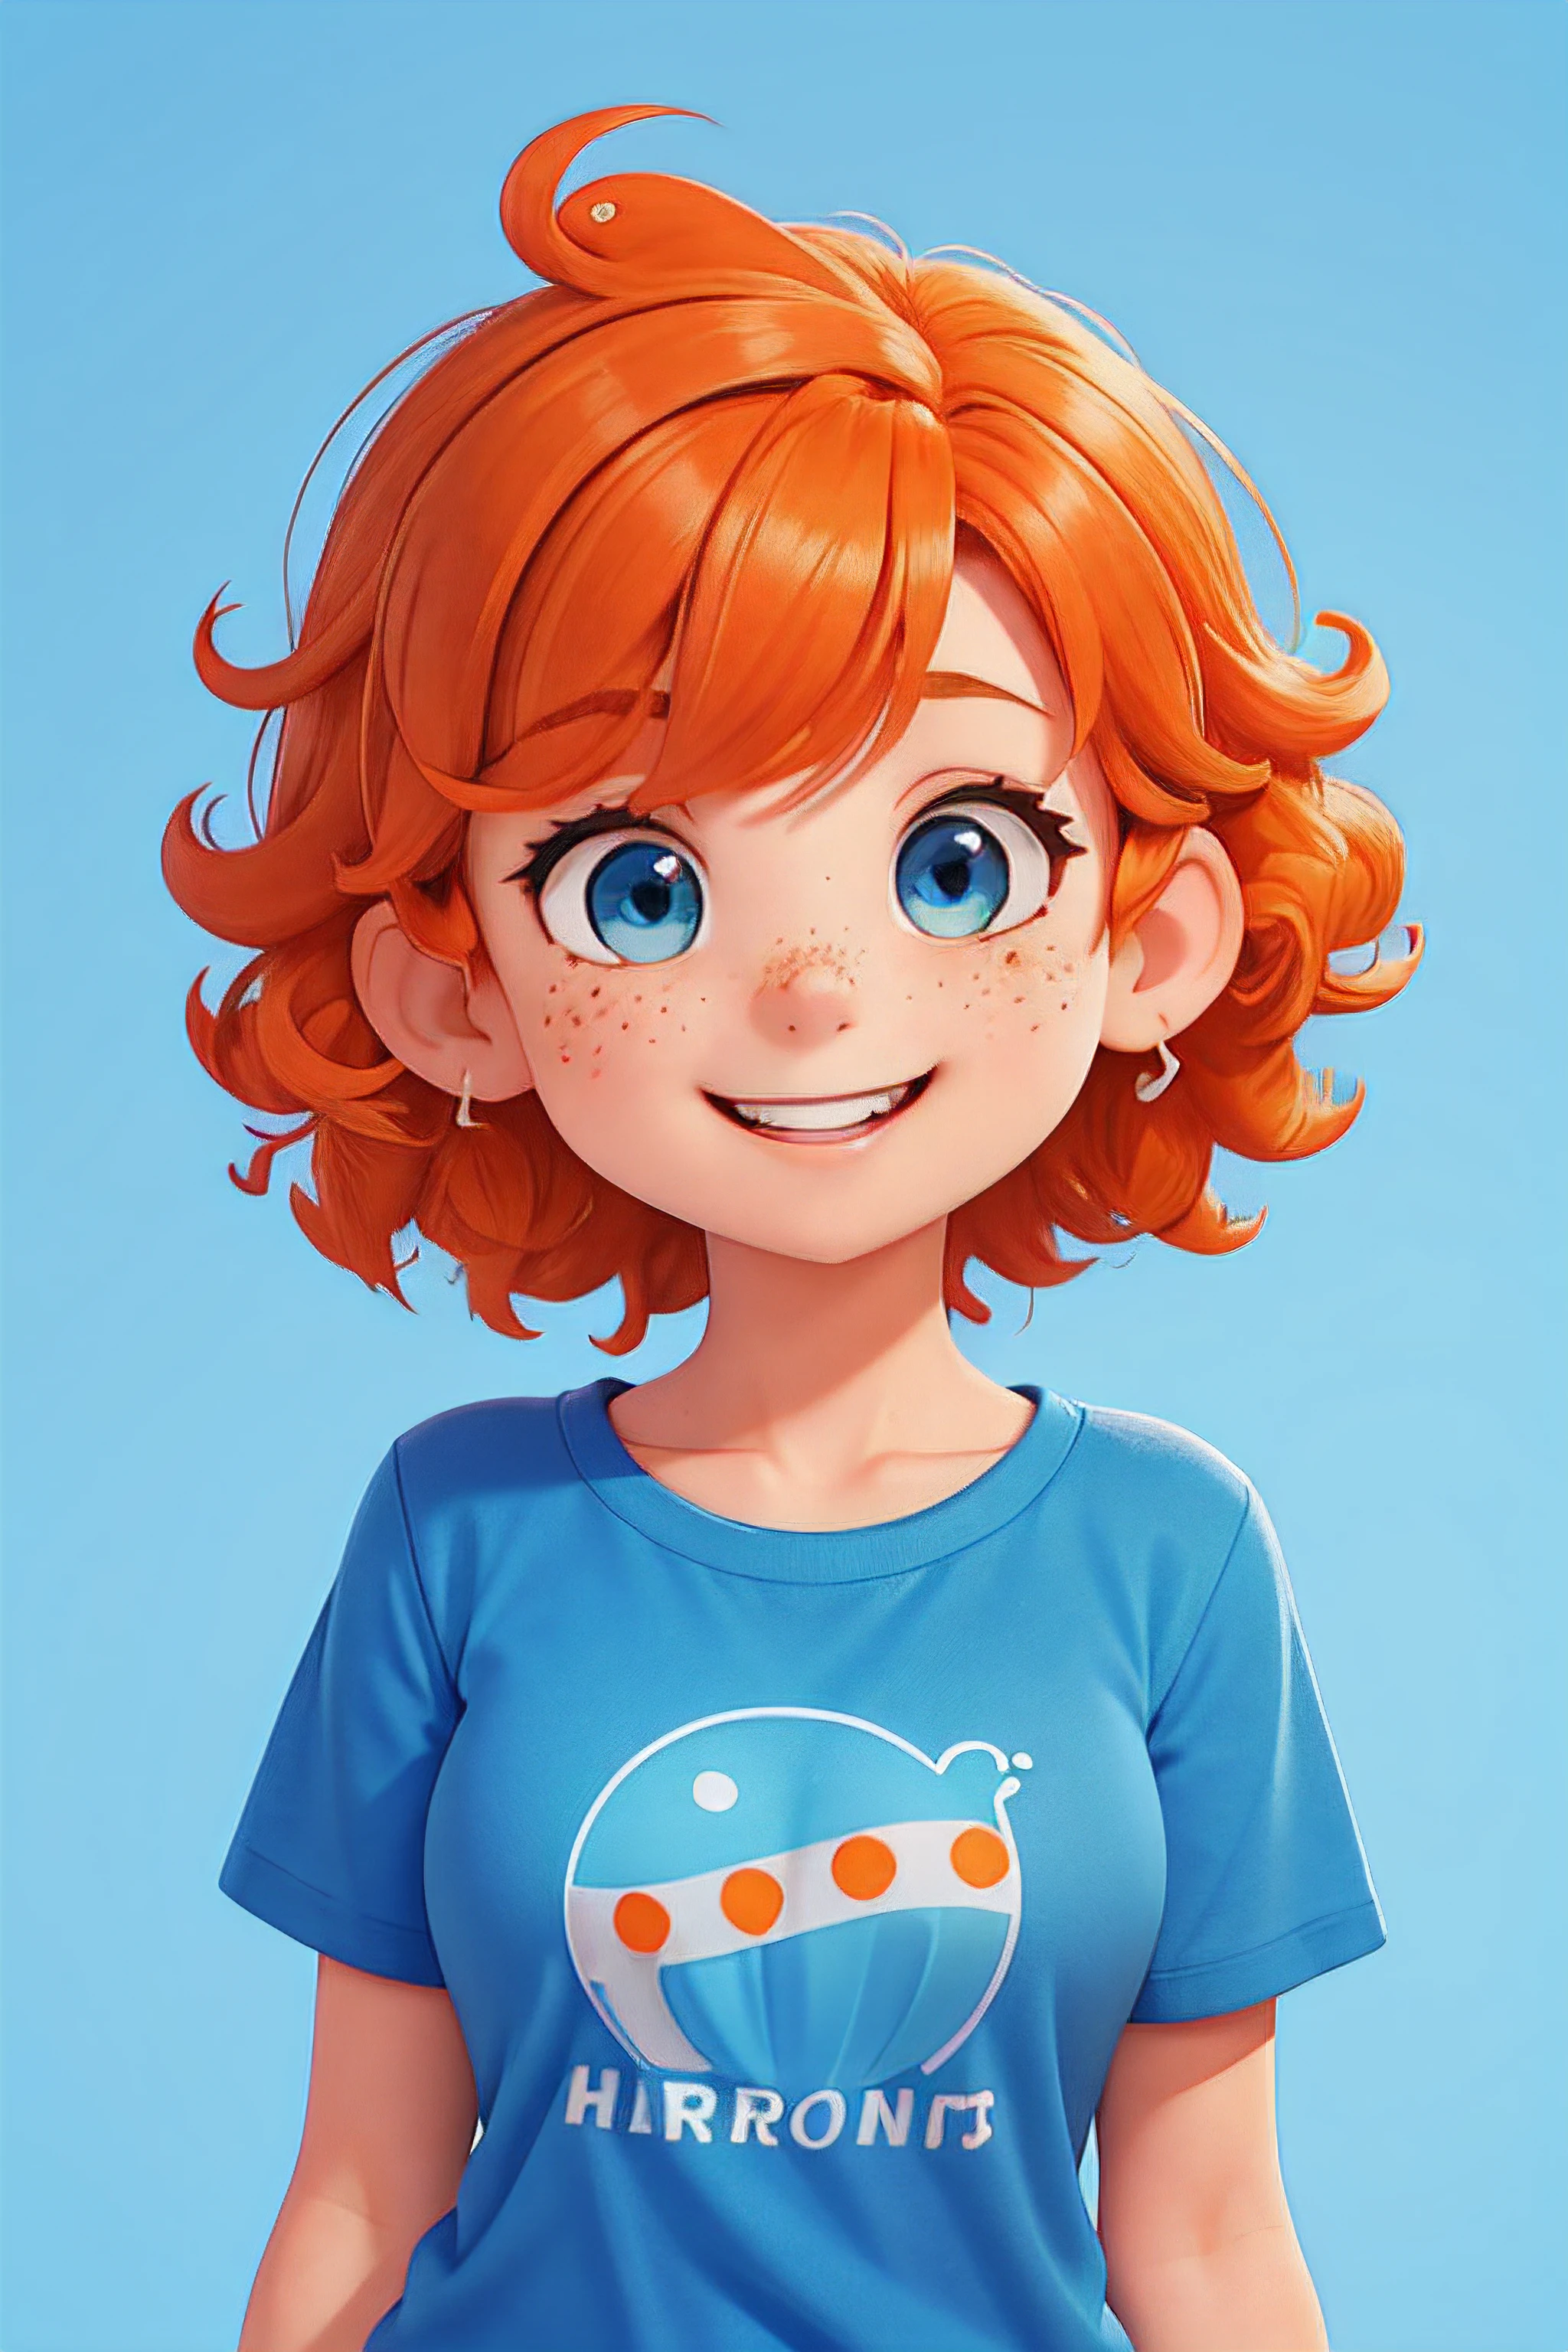 1adult woman, (adult teen), solo, cheerful smile, looking at viewer, blue shirt, blue clean background, upper body, (Curly-haired girl joyfully), (orange hair), blurry, (short hair), freckles, bangs, teeth, parted lips, blue eyes, orange hair, short t-shirt